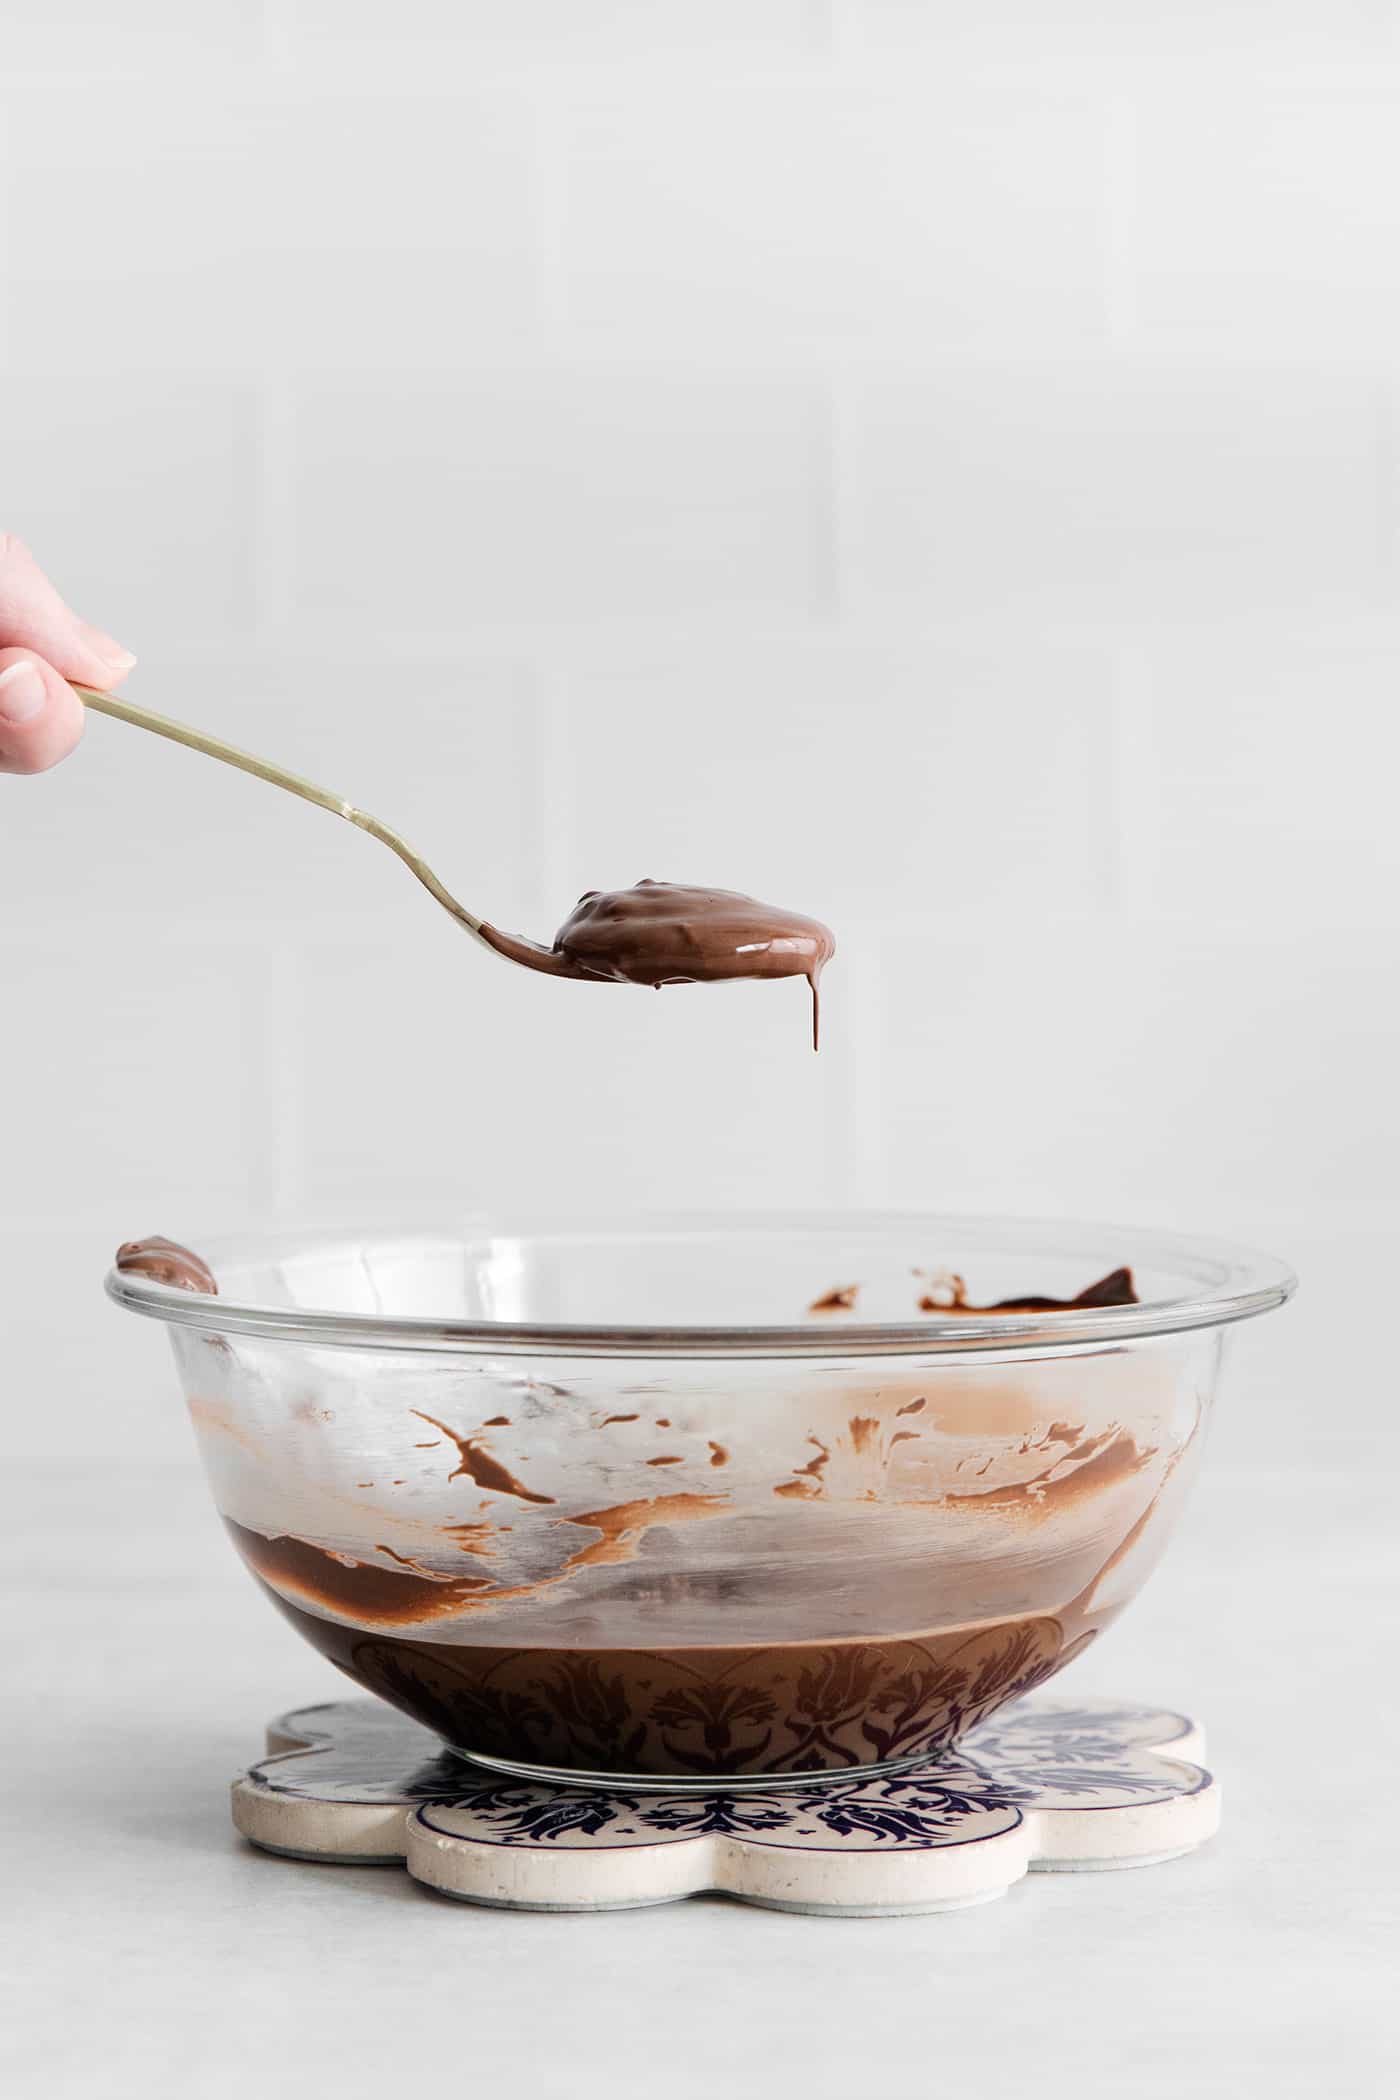 A spoon holding a chocolate dipped ritz cracker over a bowl of chocolate